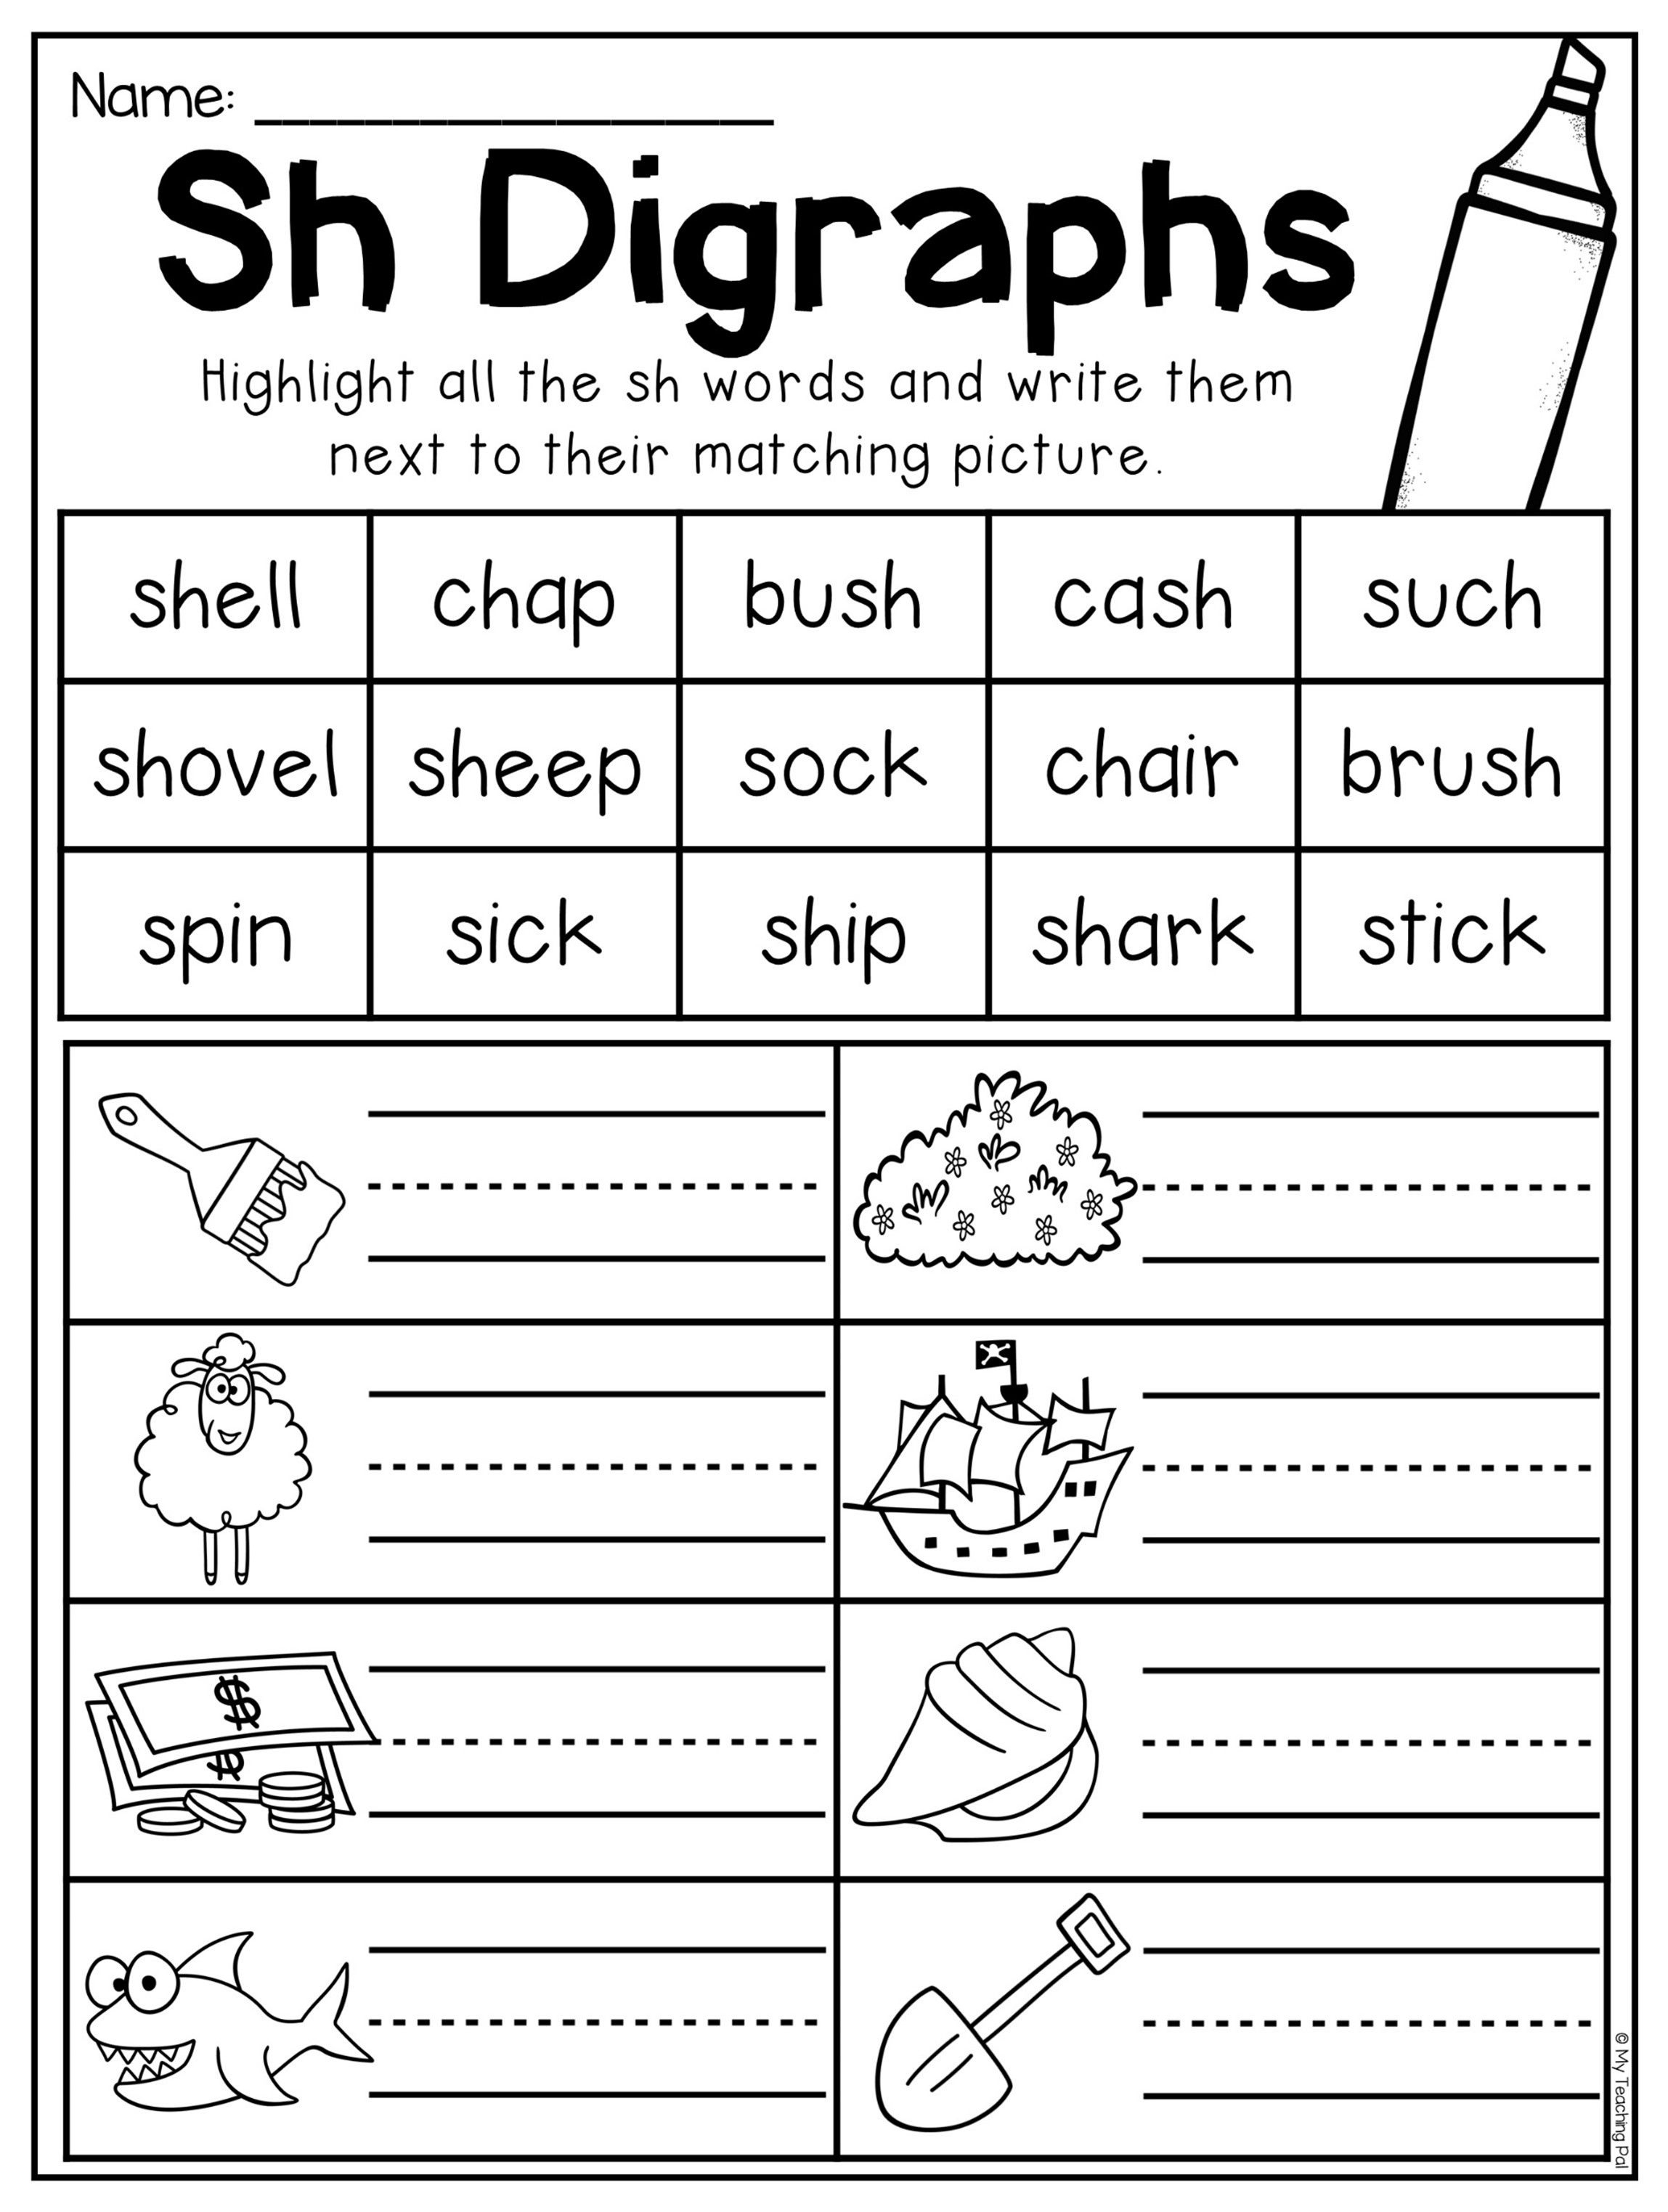 Digraph Worksheet Packet - Ch, Sh, Th, Wh, Ph | Tpt Language Arts - Free Printable Ch Digraph Worksheets